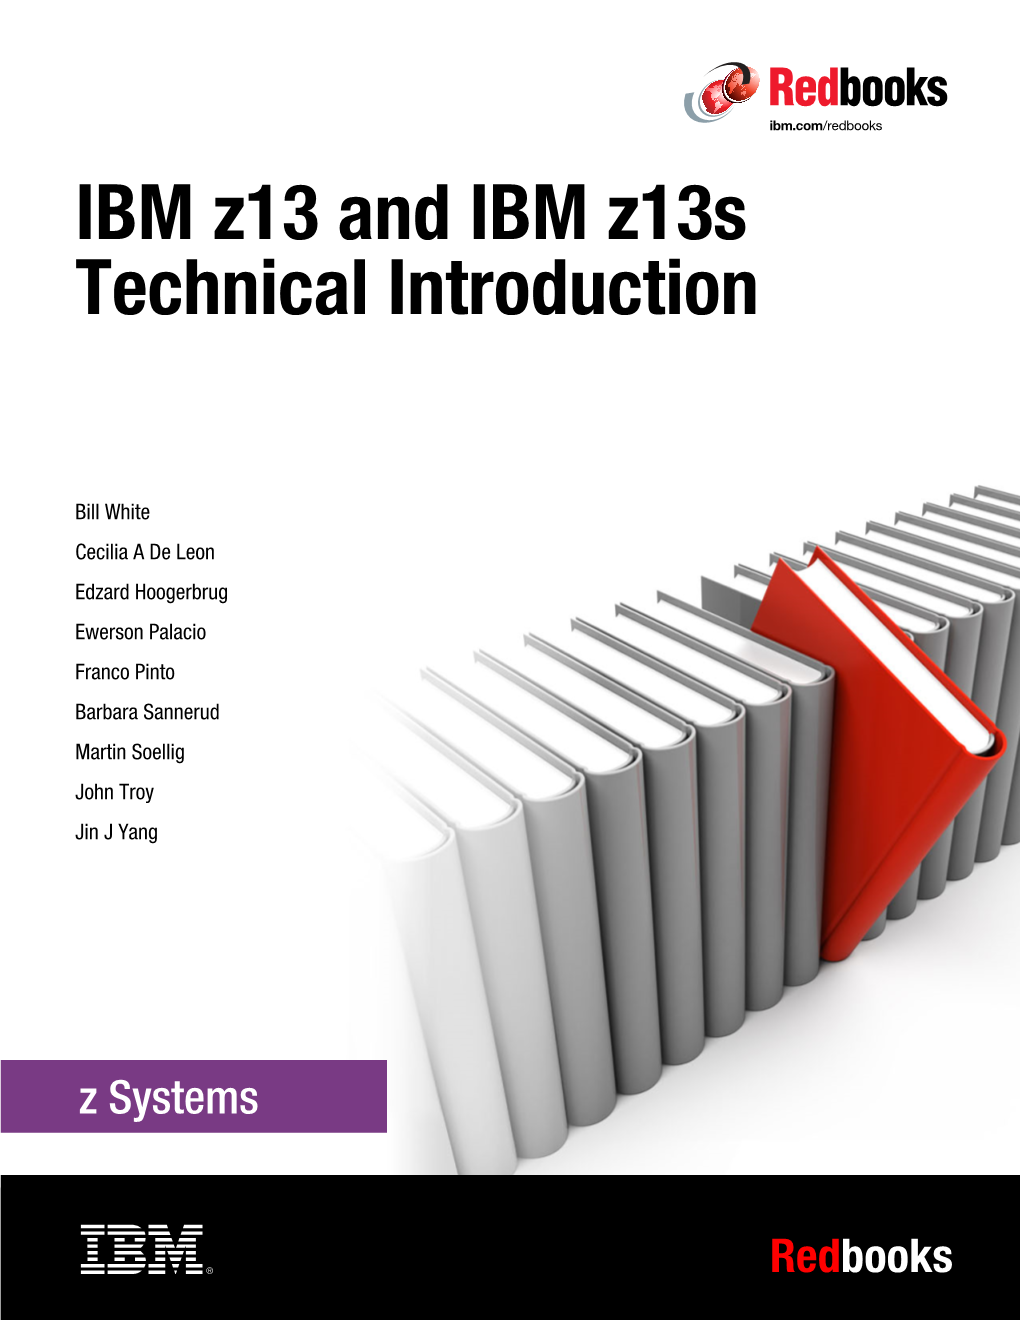 IBM Z13 and IBM Z13s Technical Introduction